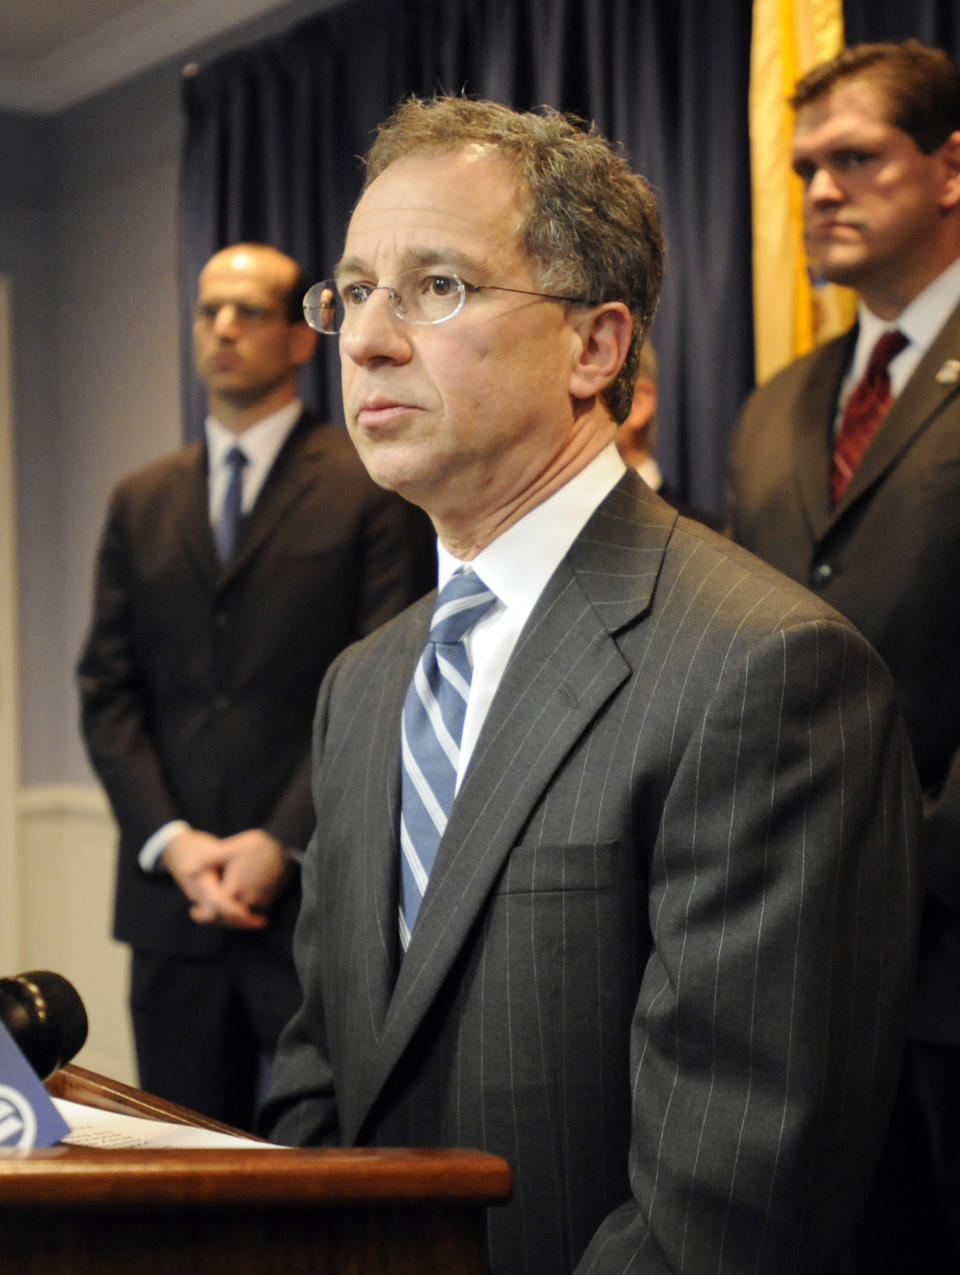 U.S. Attorney Paul J.Fishman listens to a question at a news conference announcing the uncovering of one of the largest counterfeit goods smuggling operations ever charged Friday, March 2, 2012, in Newark, N.J. (AP Photo/Bill Kostroun)